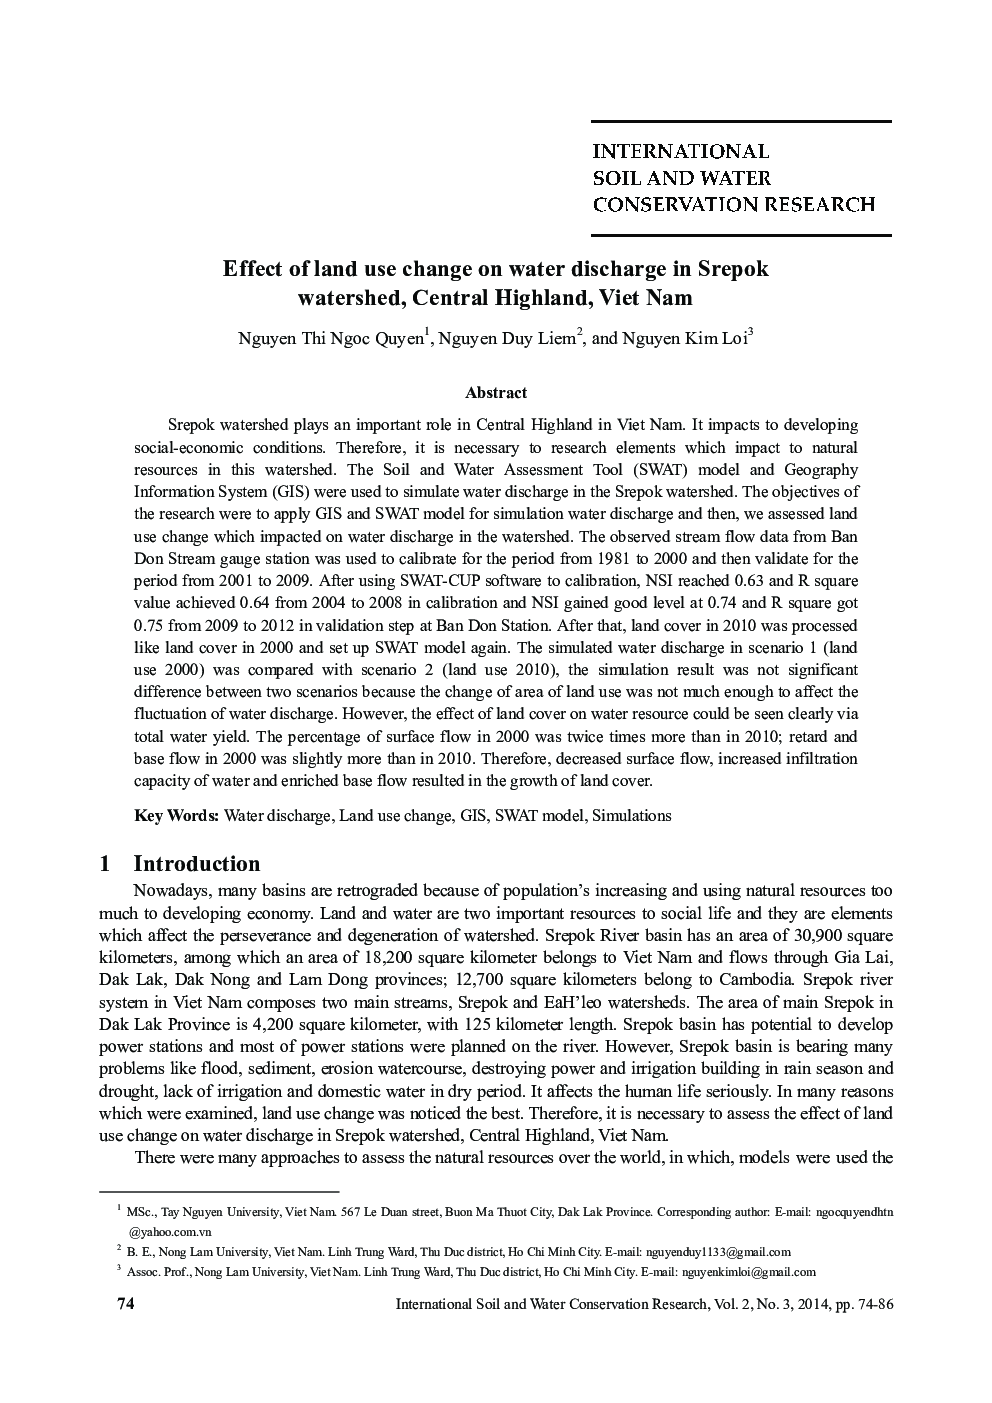 Effect of land use change on water discharge in Srepok watershed, Central Highland, Viet Nam